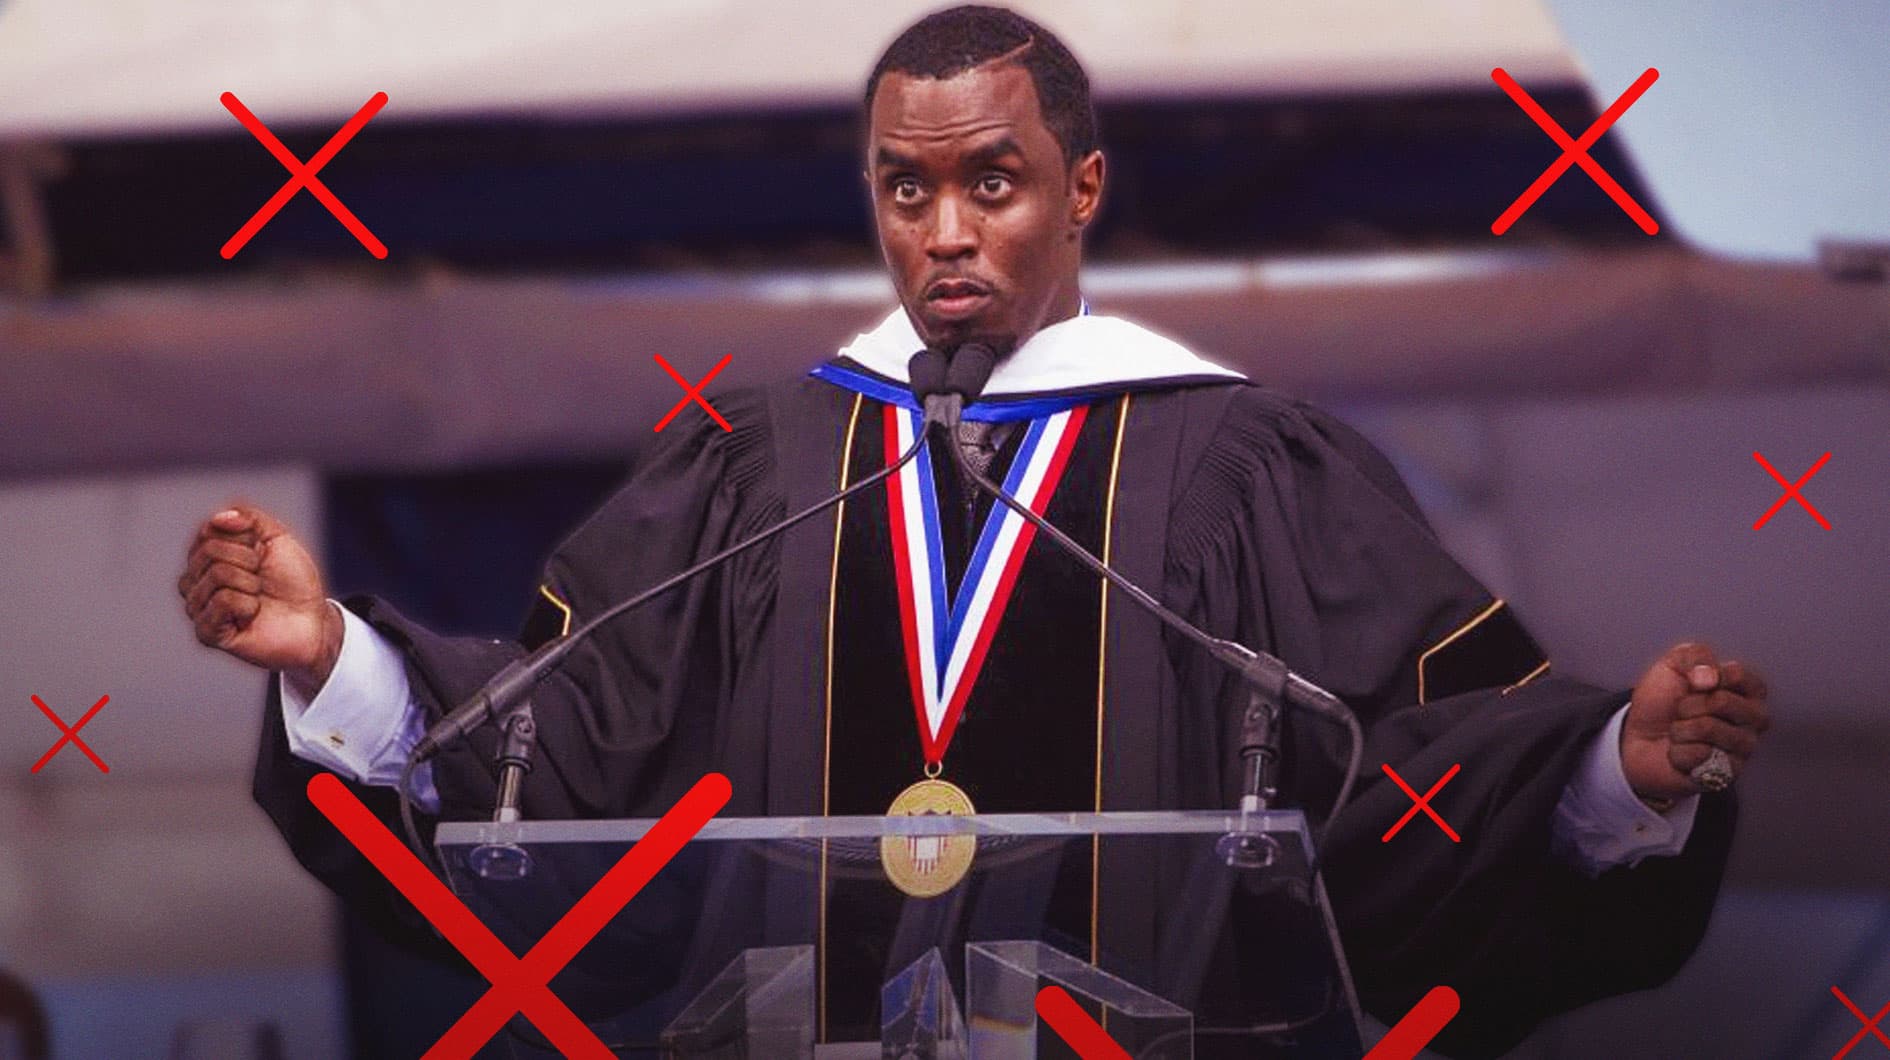 Howard University deciding to revoke Sean 'Diddy' Combs's degree has sparked an interesting conversation about honorary degrees.